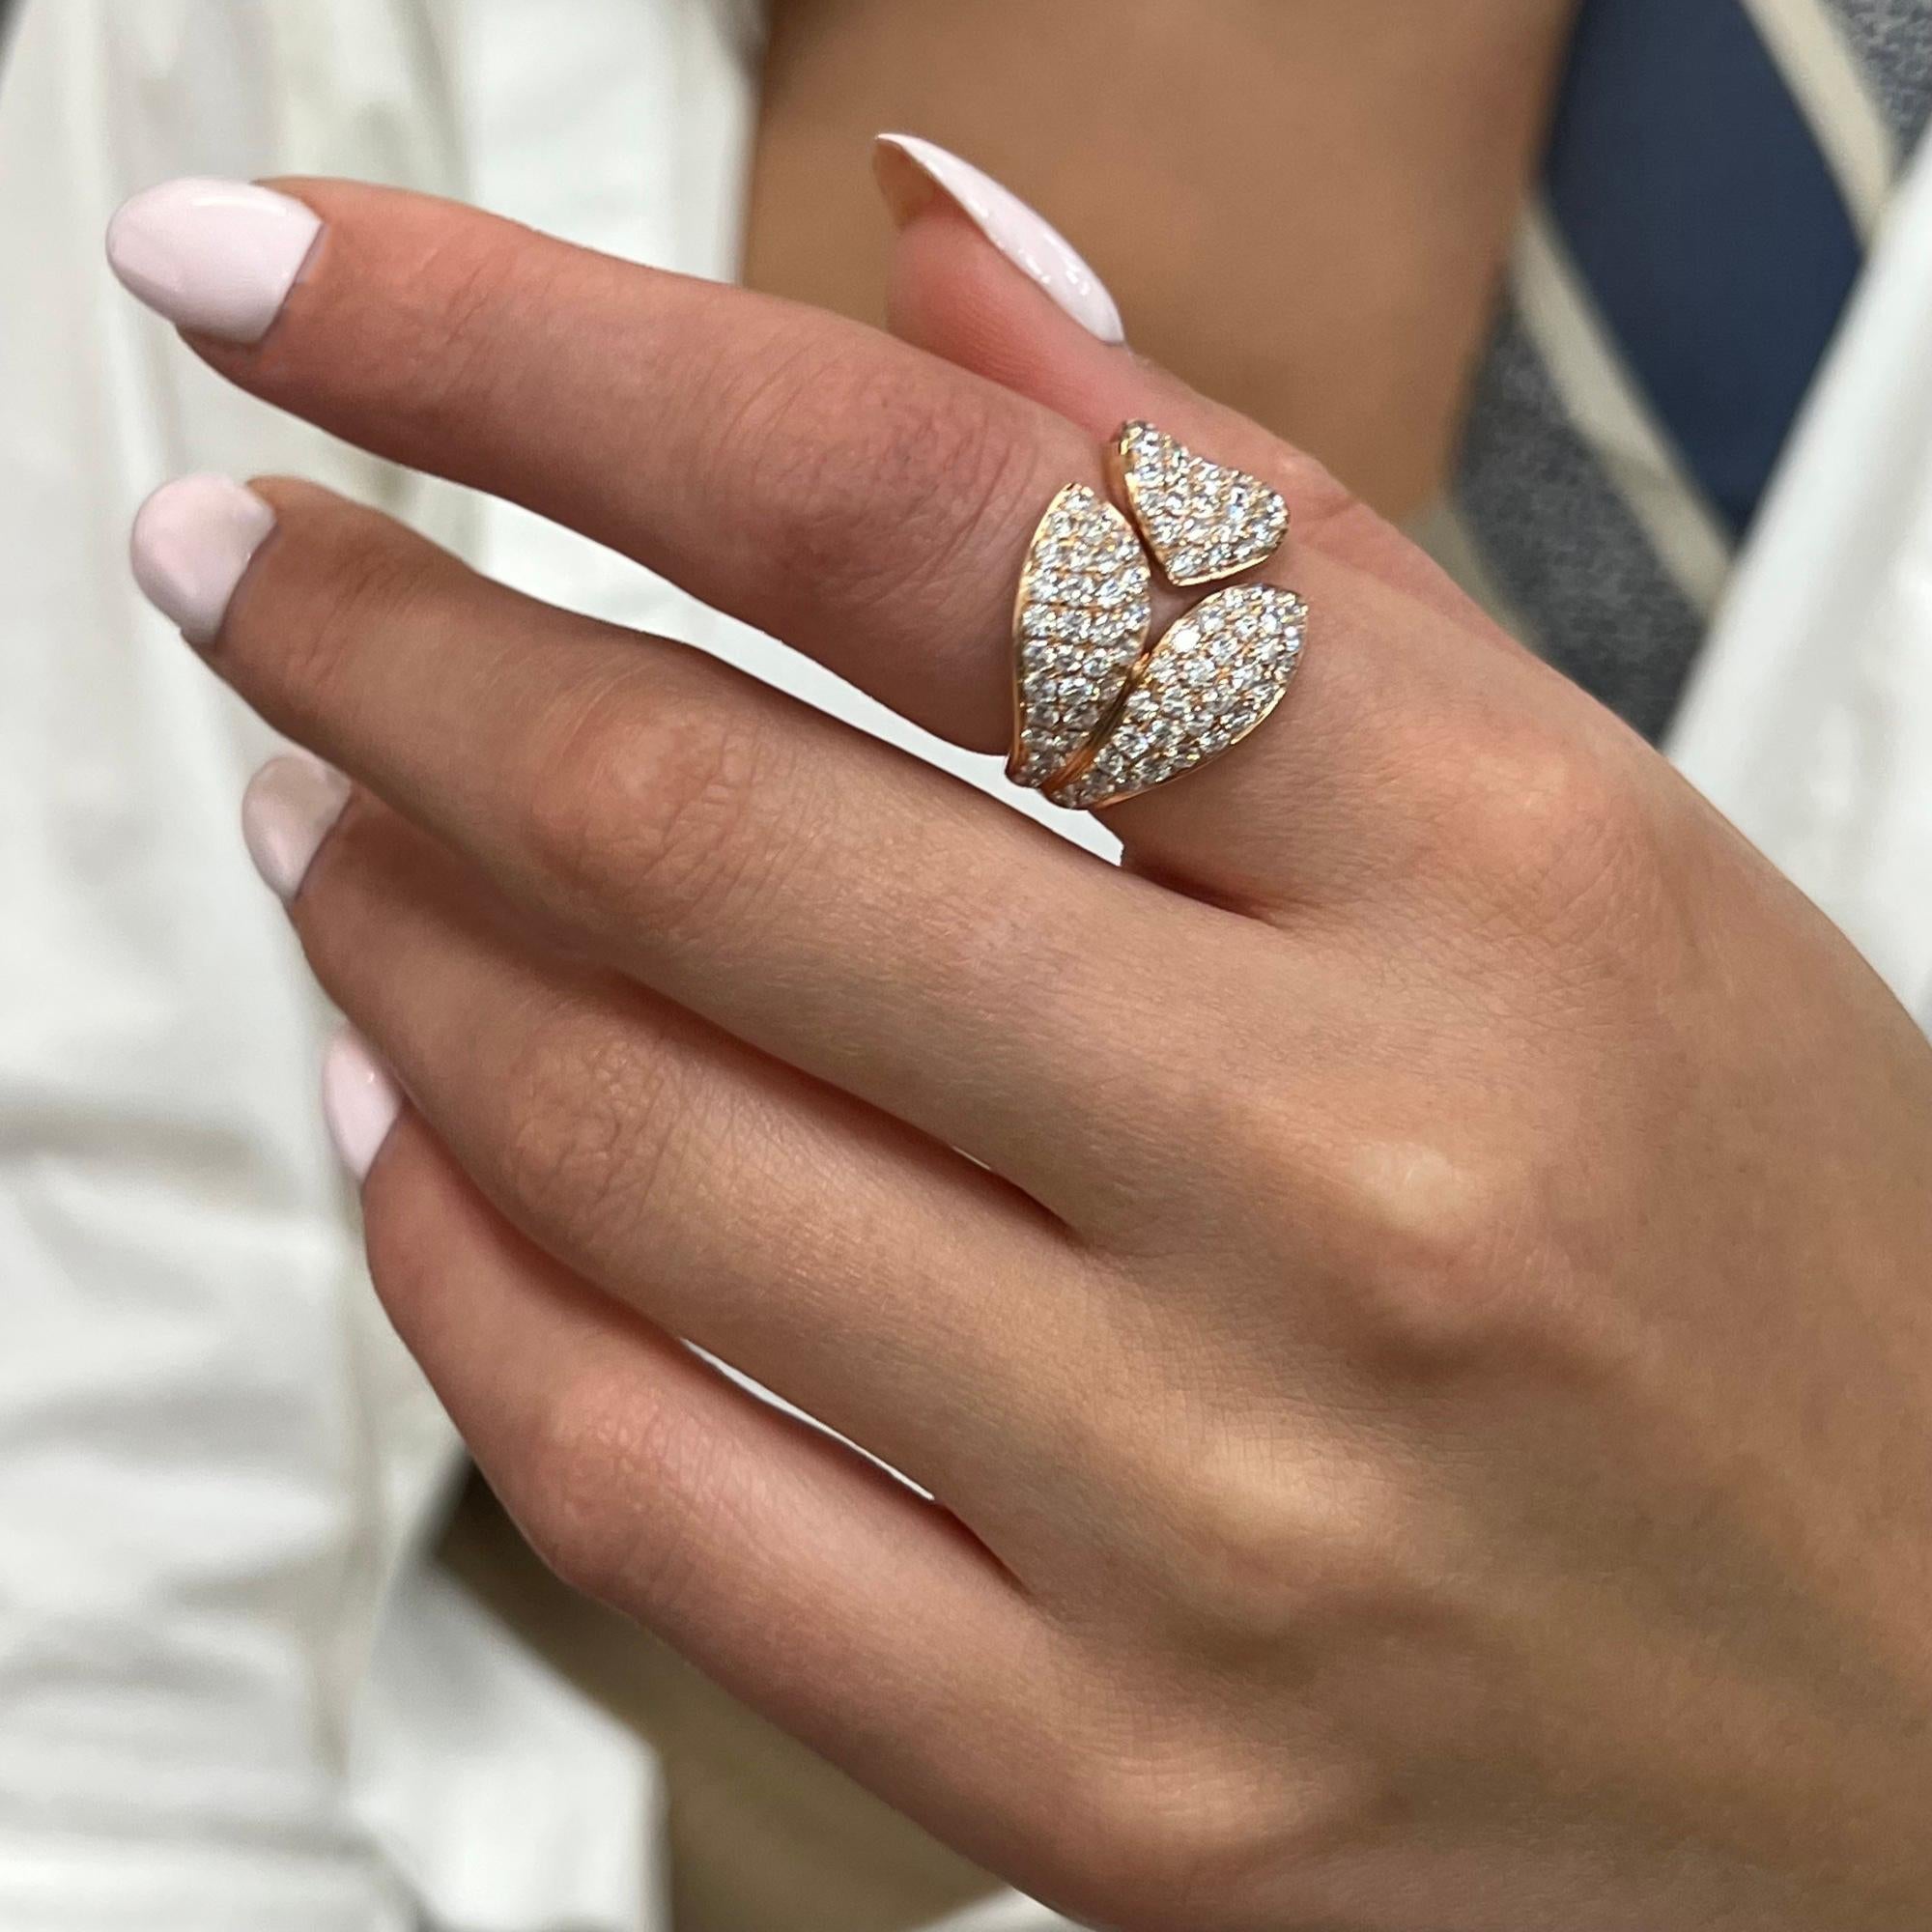 This luxurious 18k rose gold ladies diamond ring showcases 2.00 carats of dazzling round cut diamonds in pave setting. Perfectly encrusted in a lustrous yellow gold leaves shank. Diamond Quality: G-H color, VS-SI clarity. Ring Size: 6.25. Total